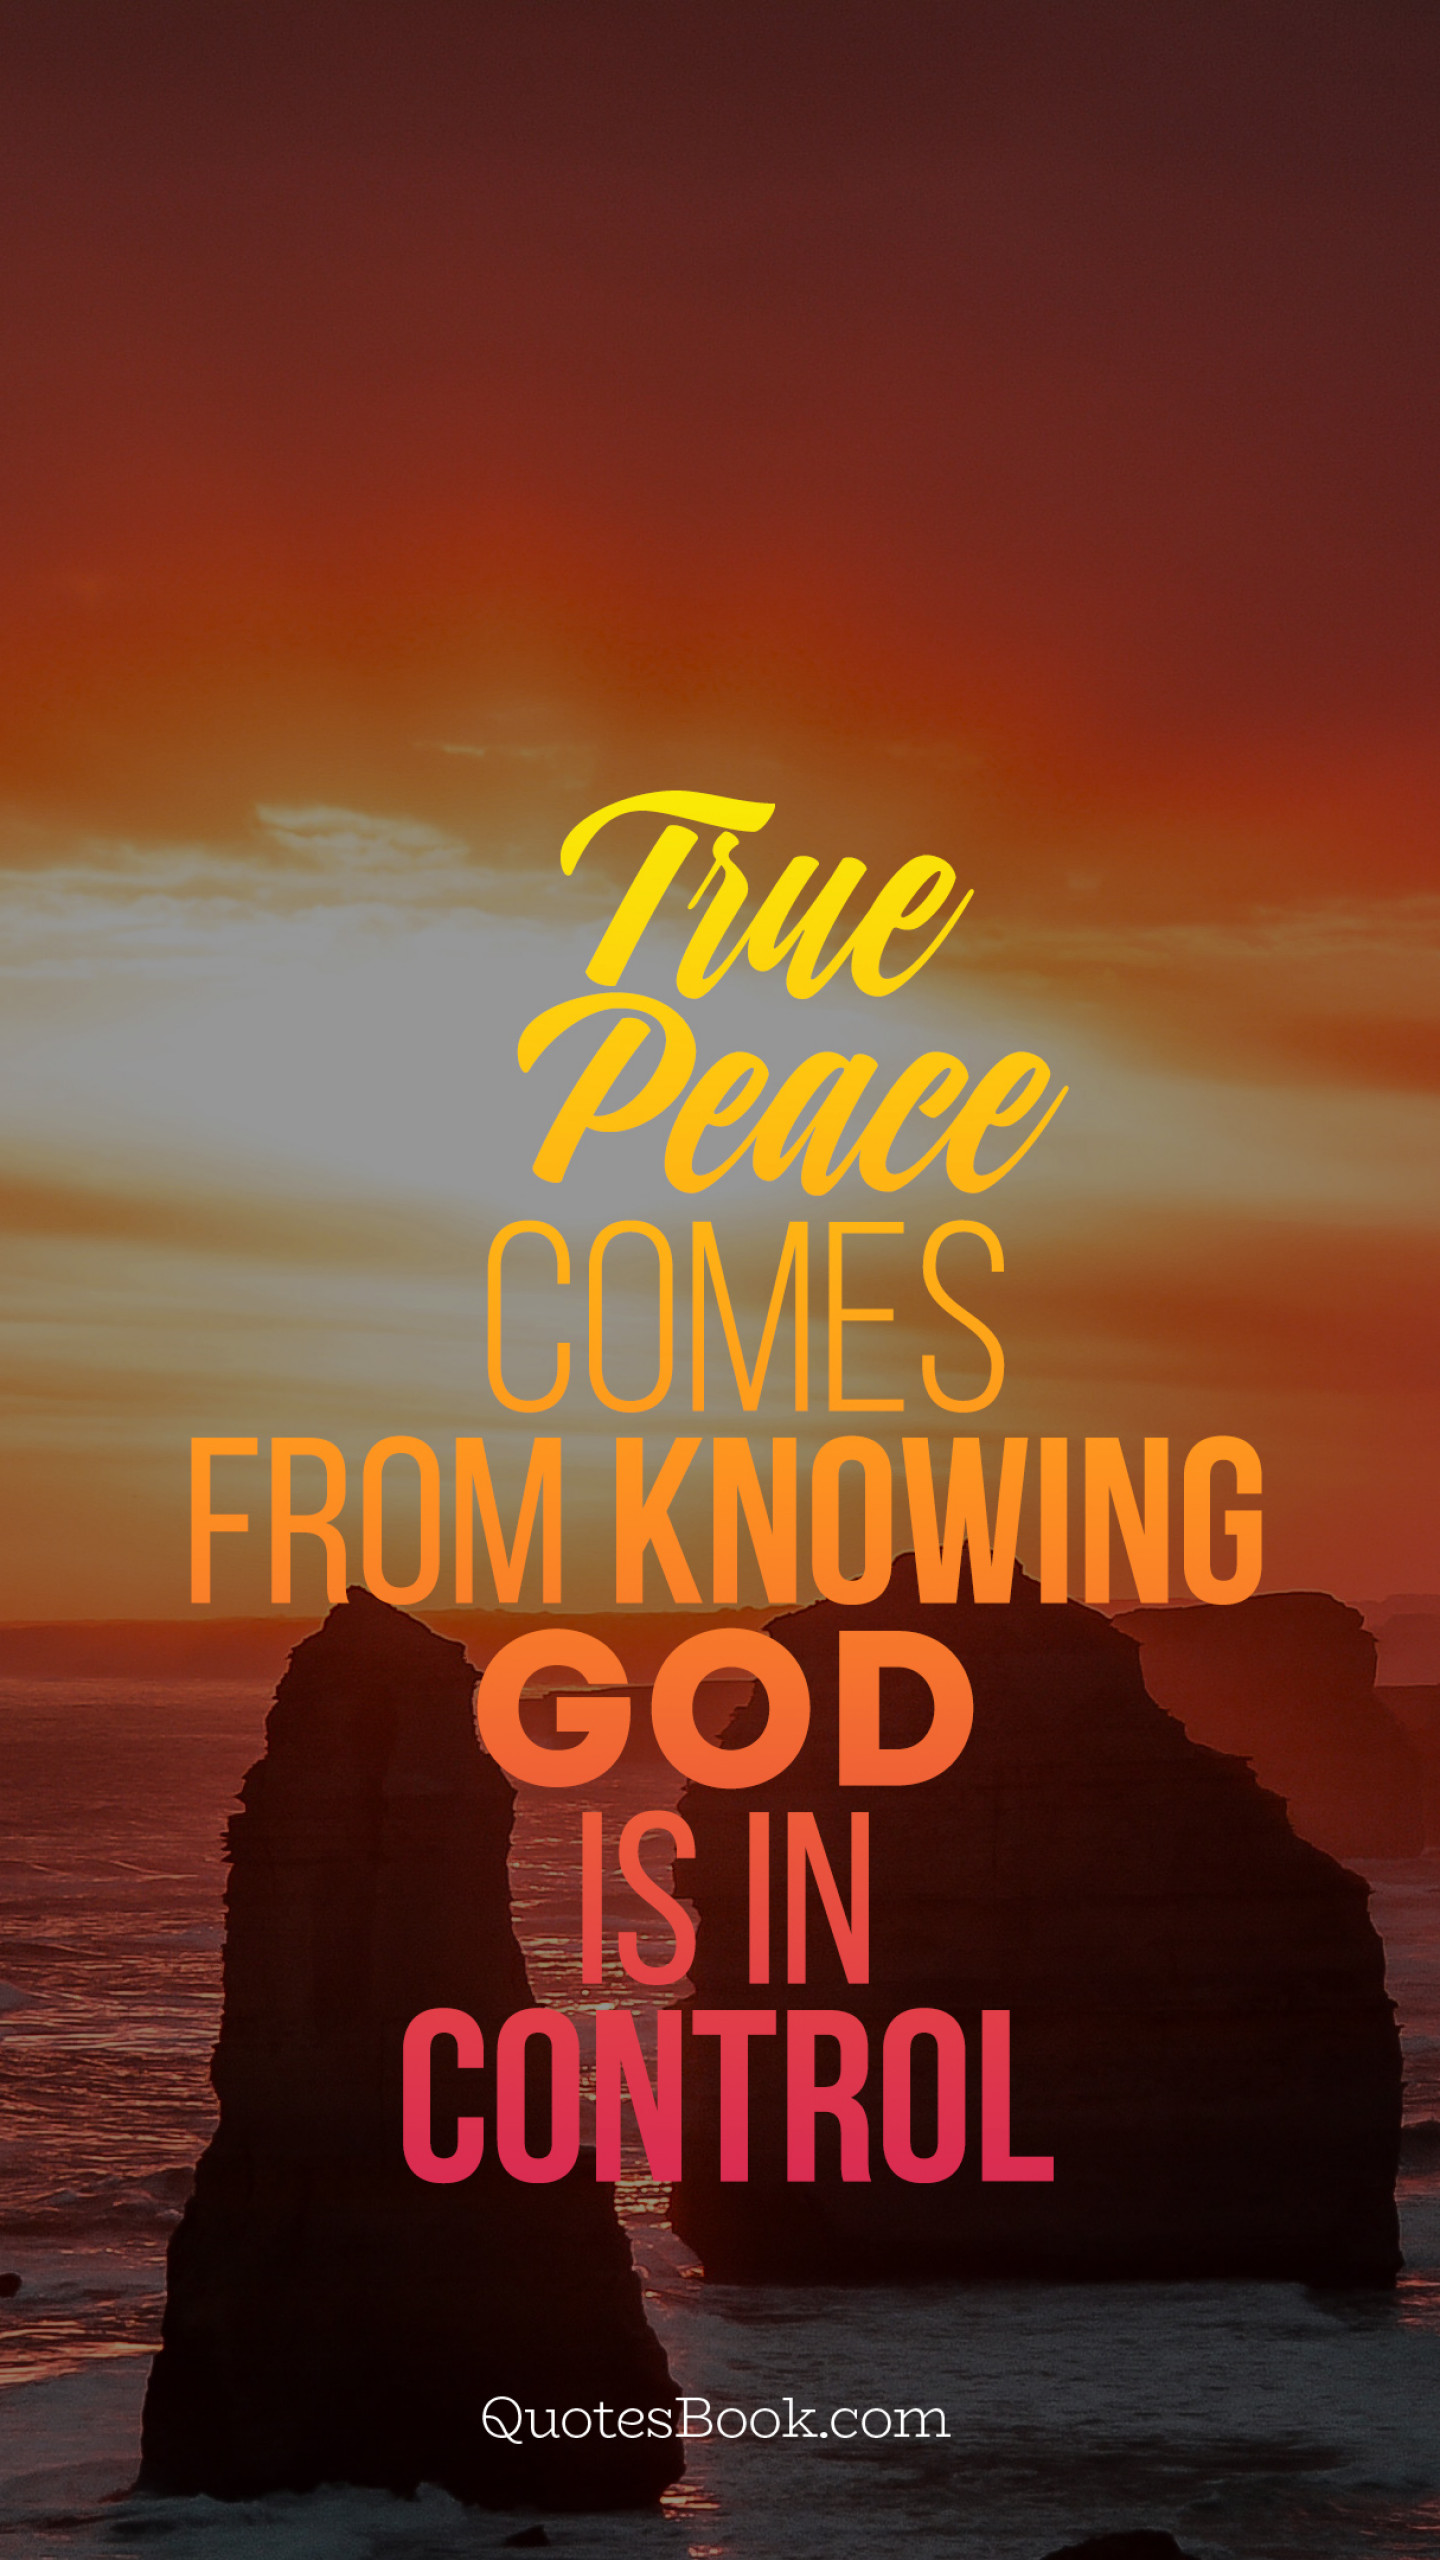 True peace comes from knowing God is in control - QuotesBook